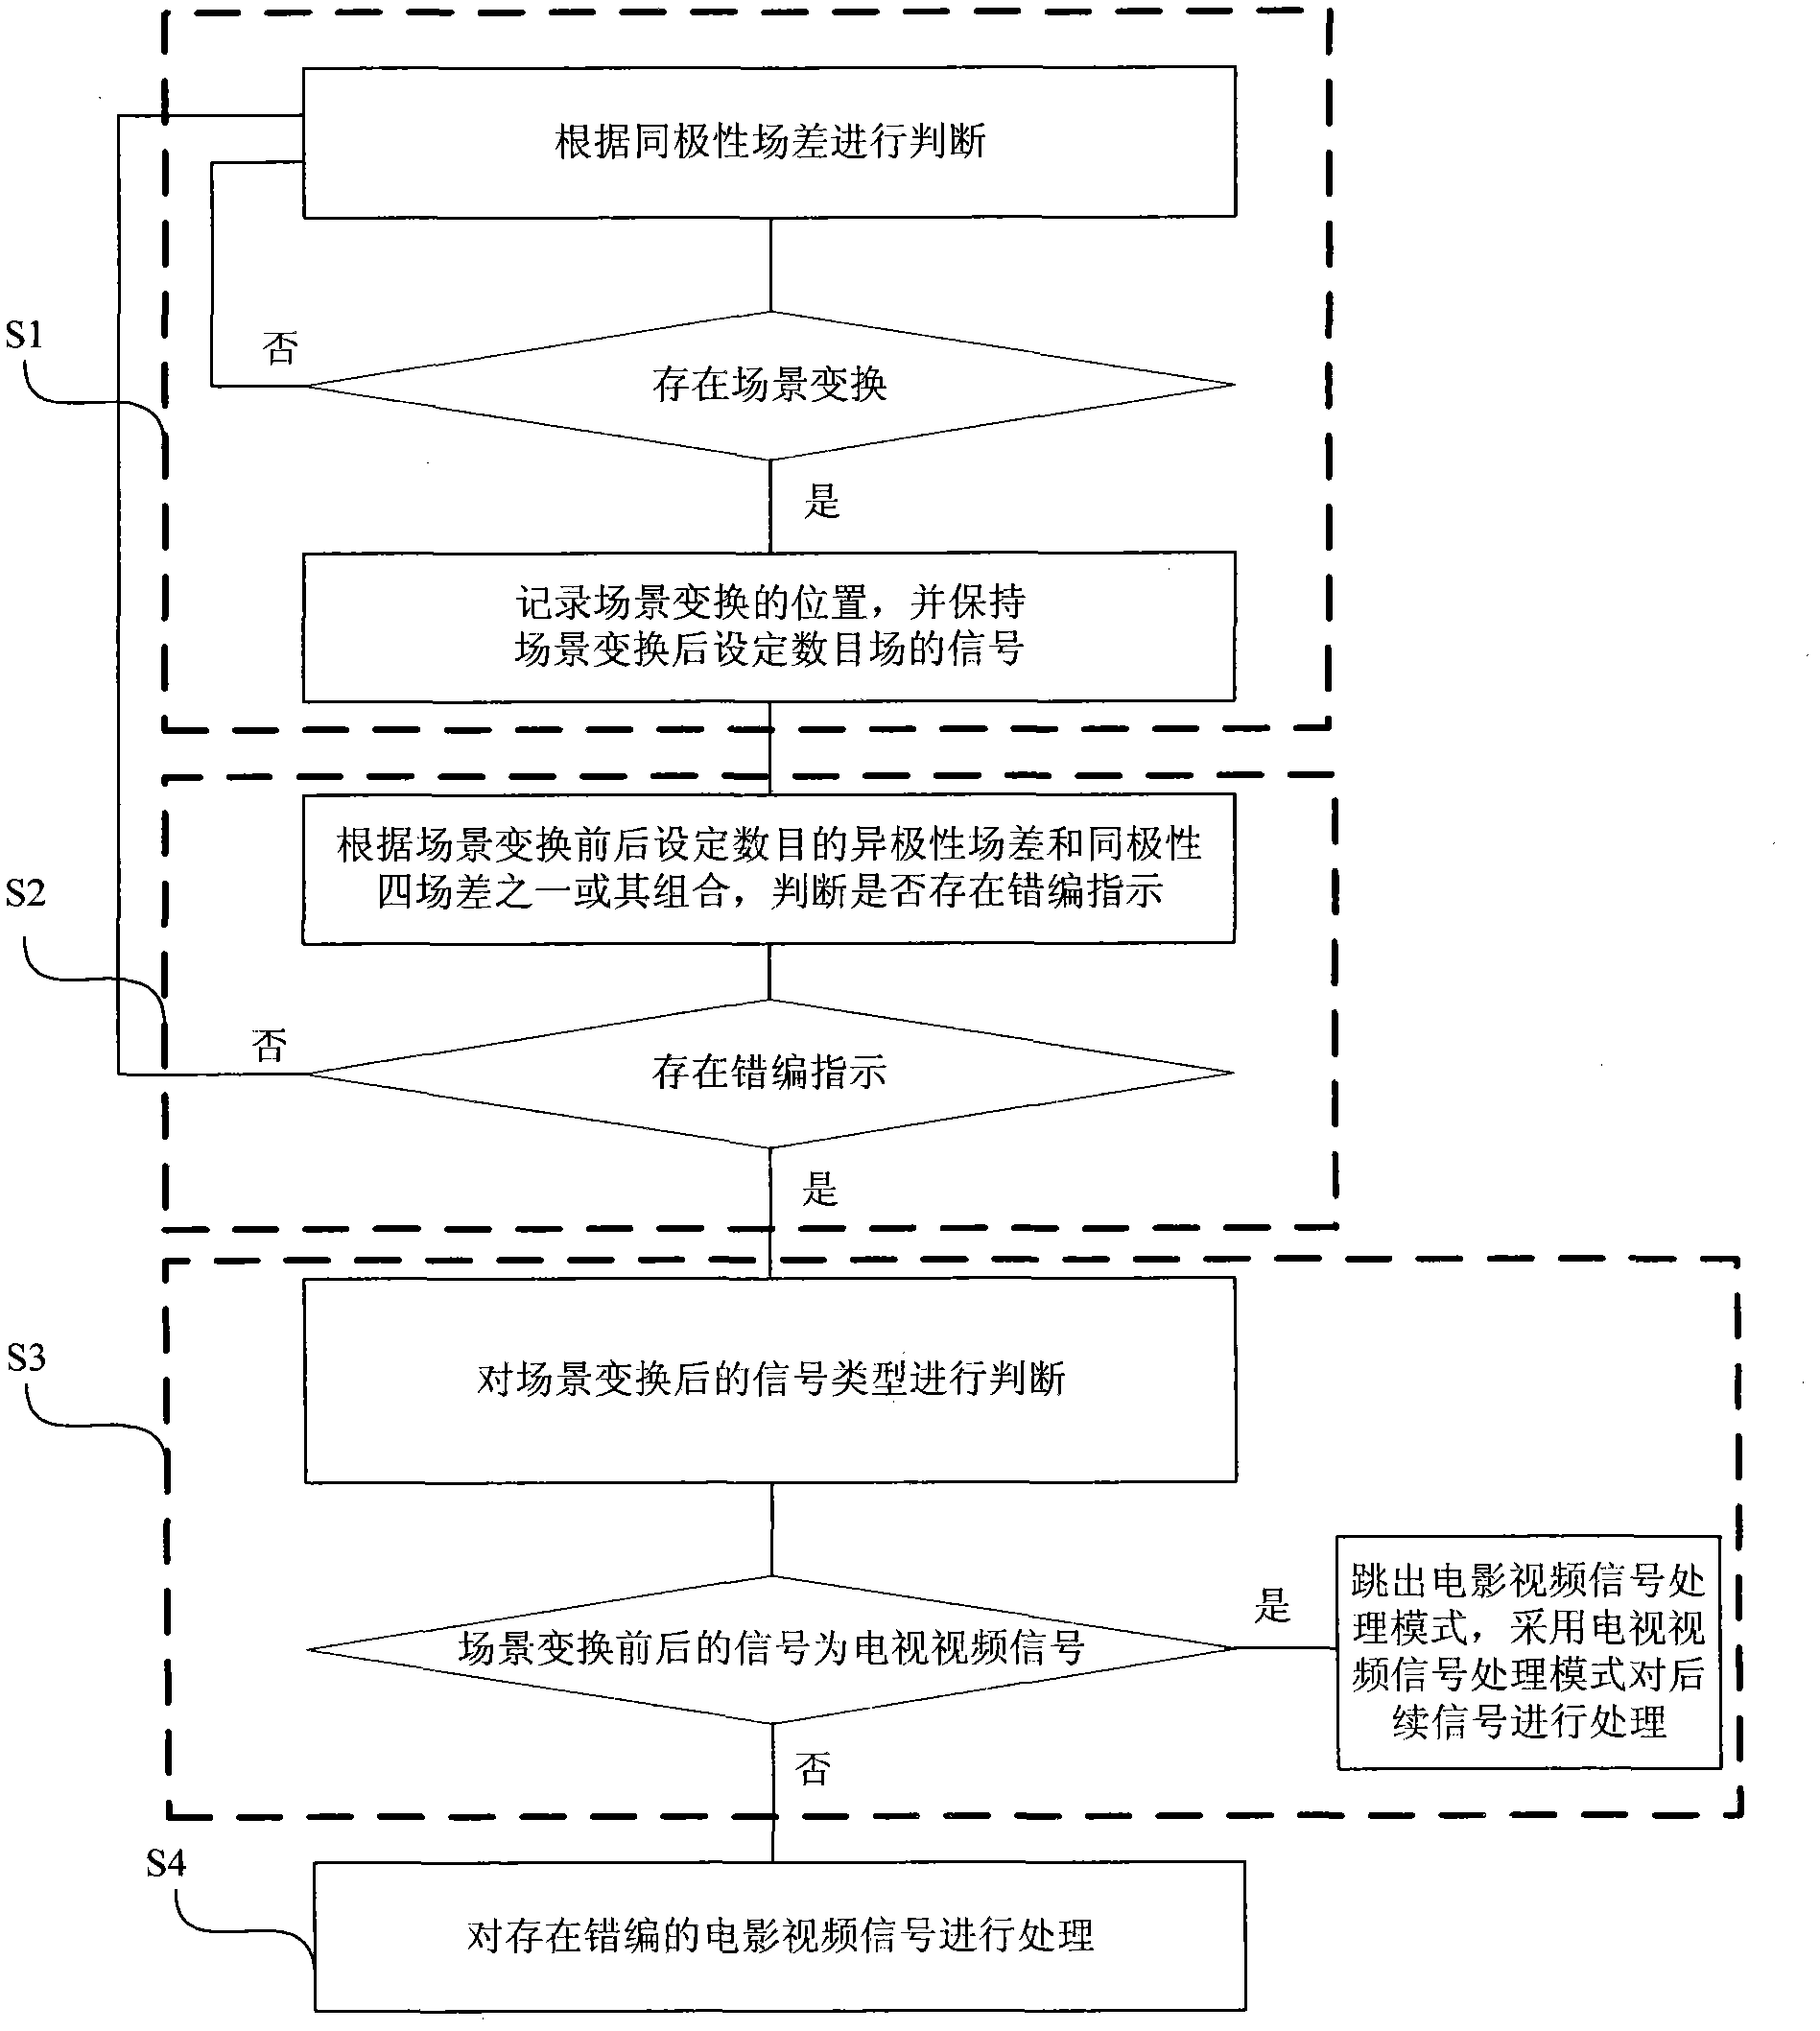 Movie-mode video signal processing method and device